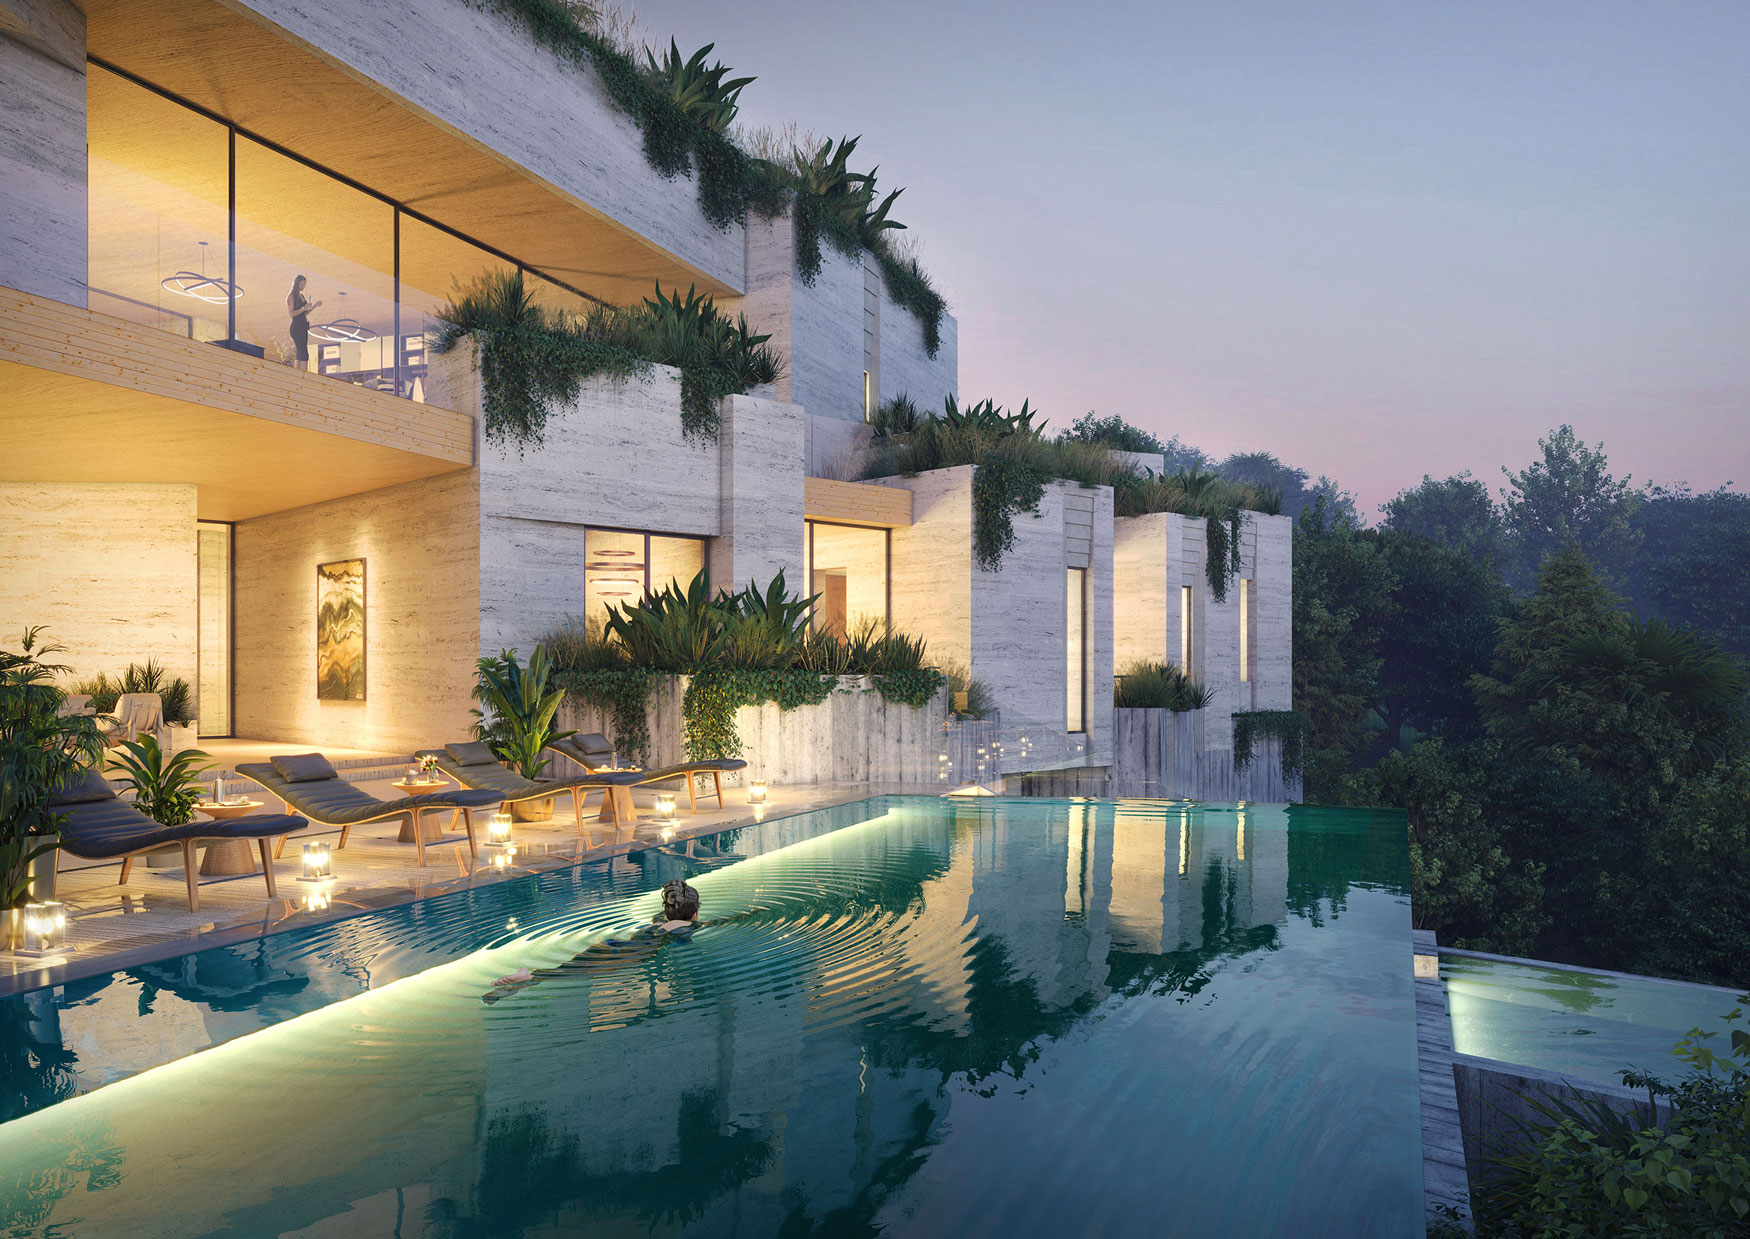 Rendering of exterior of Boulder House with an infinity pool